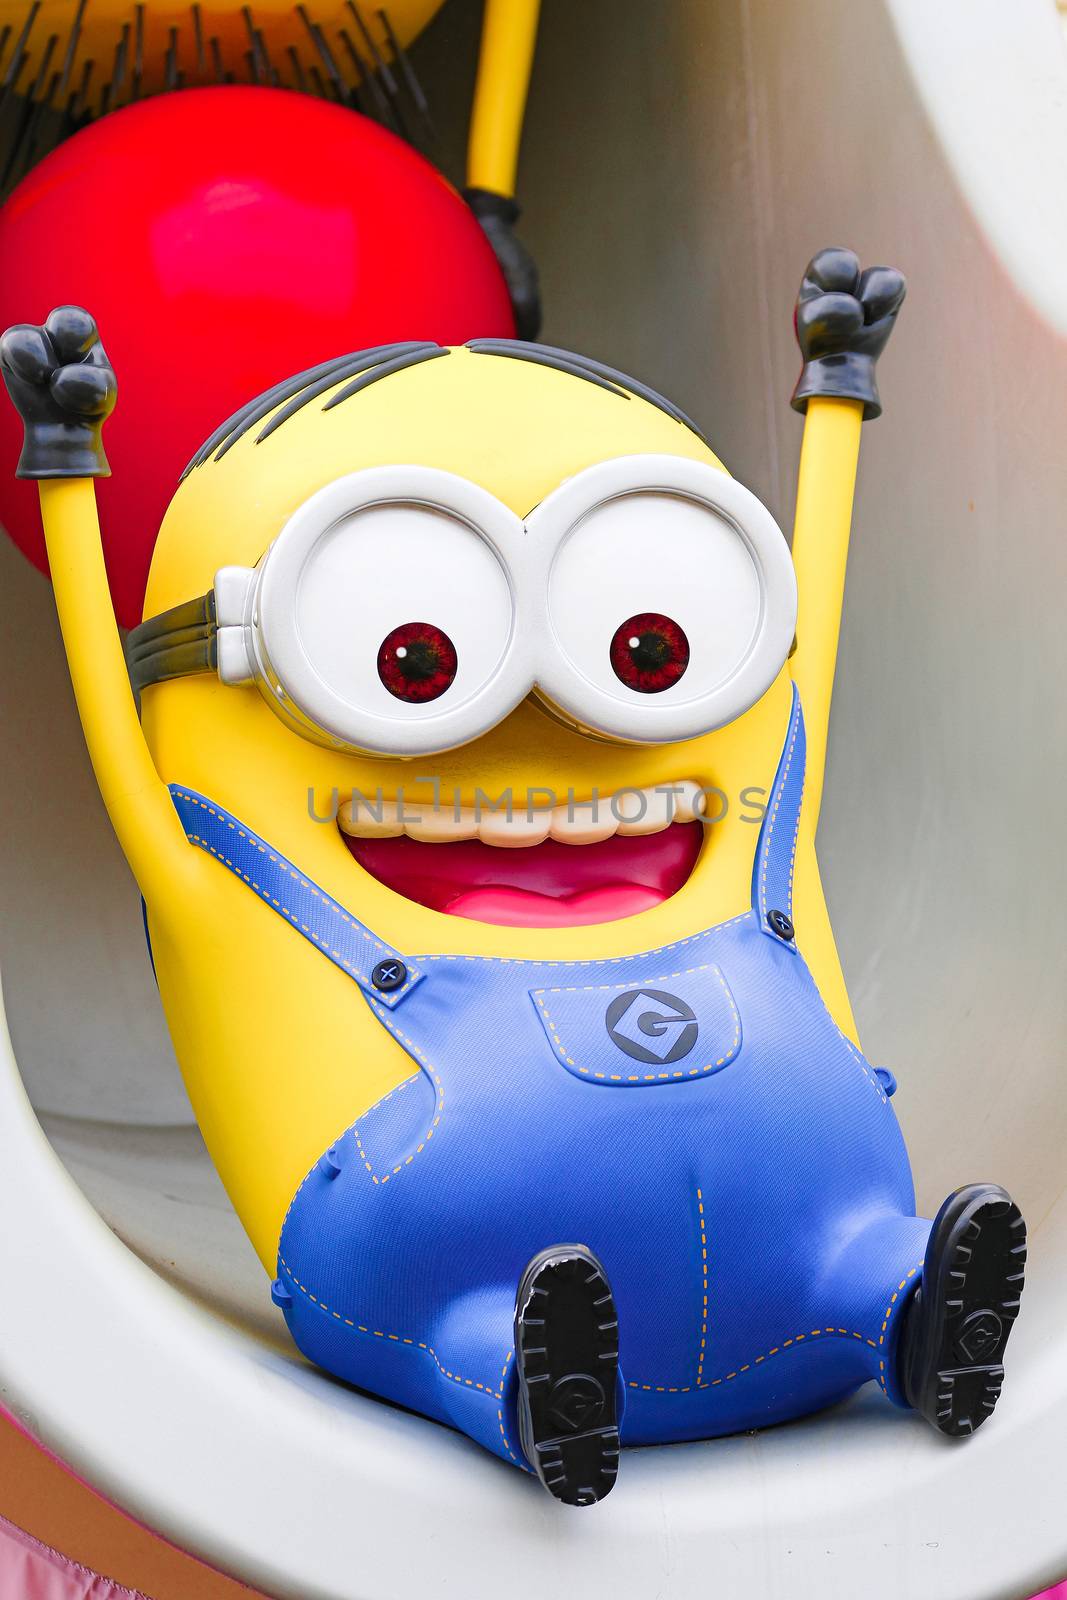 OSAKA, JAPAN - June 24, 2017 : Statue of "HAPPY MINION", located in Universal Studios Japan, Osaka, Japan. Minions are famous character from Despicable Me animation_A